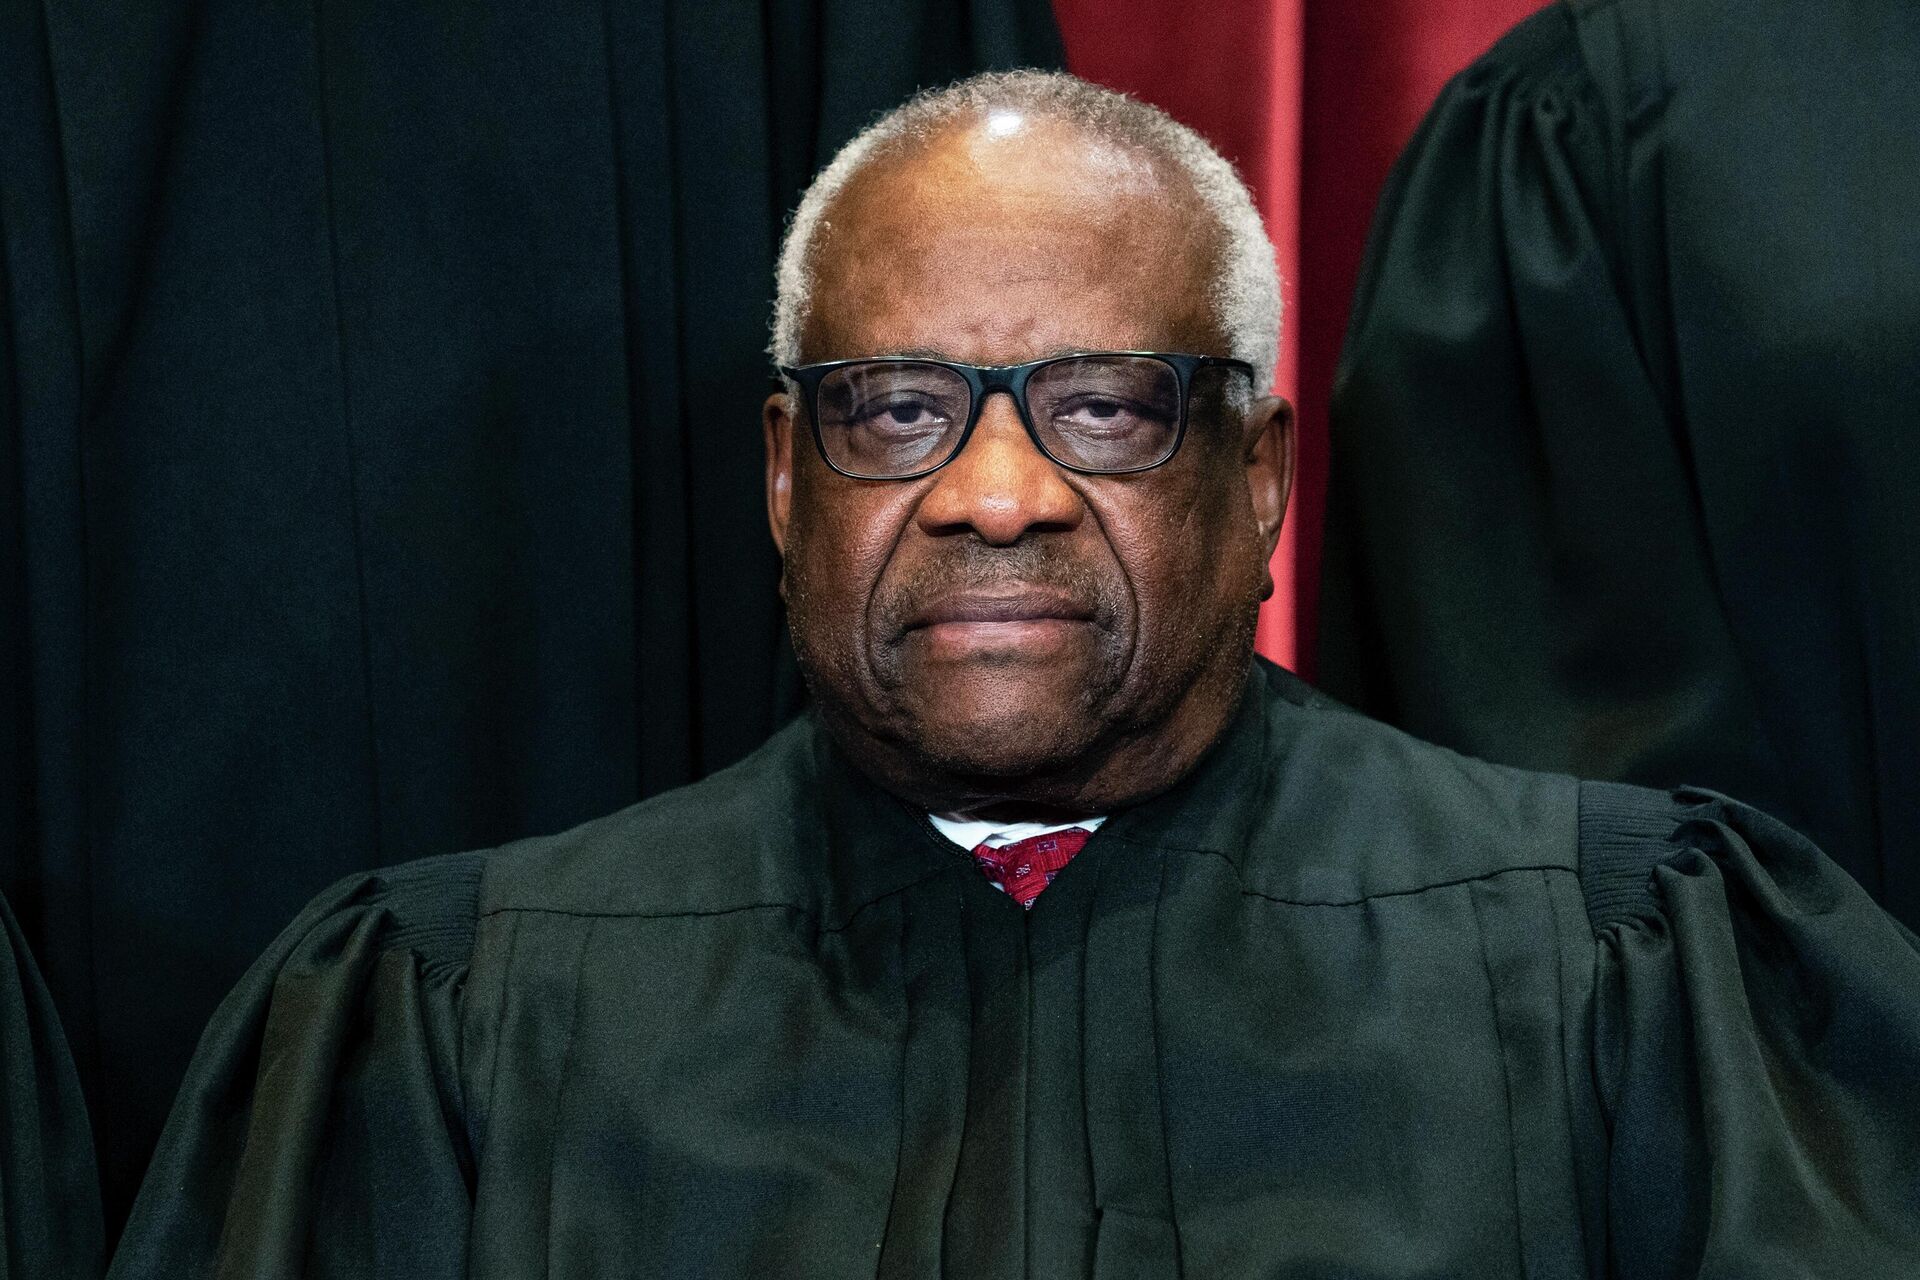 Justice Clarence Thomas sits during a group photo at the Supreme Court in Washington, on Friday, April 23, 2021. - Sputnik International, 1920, 15.05.2022